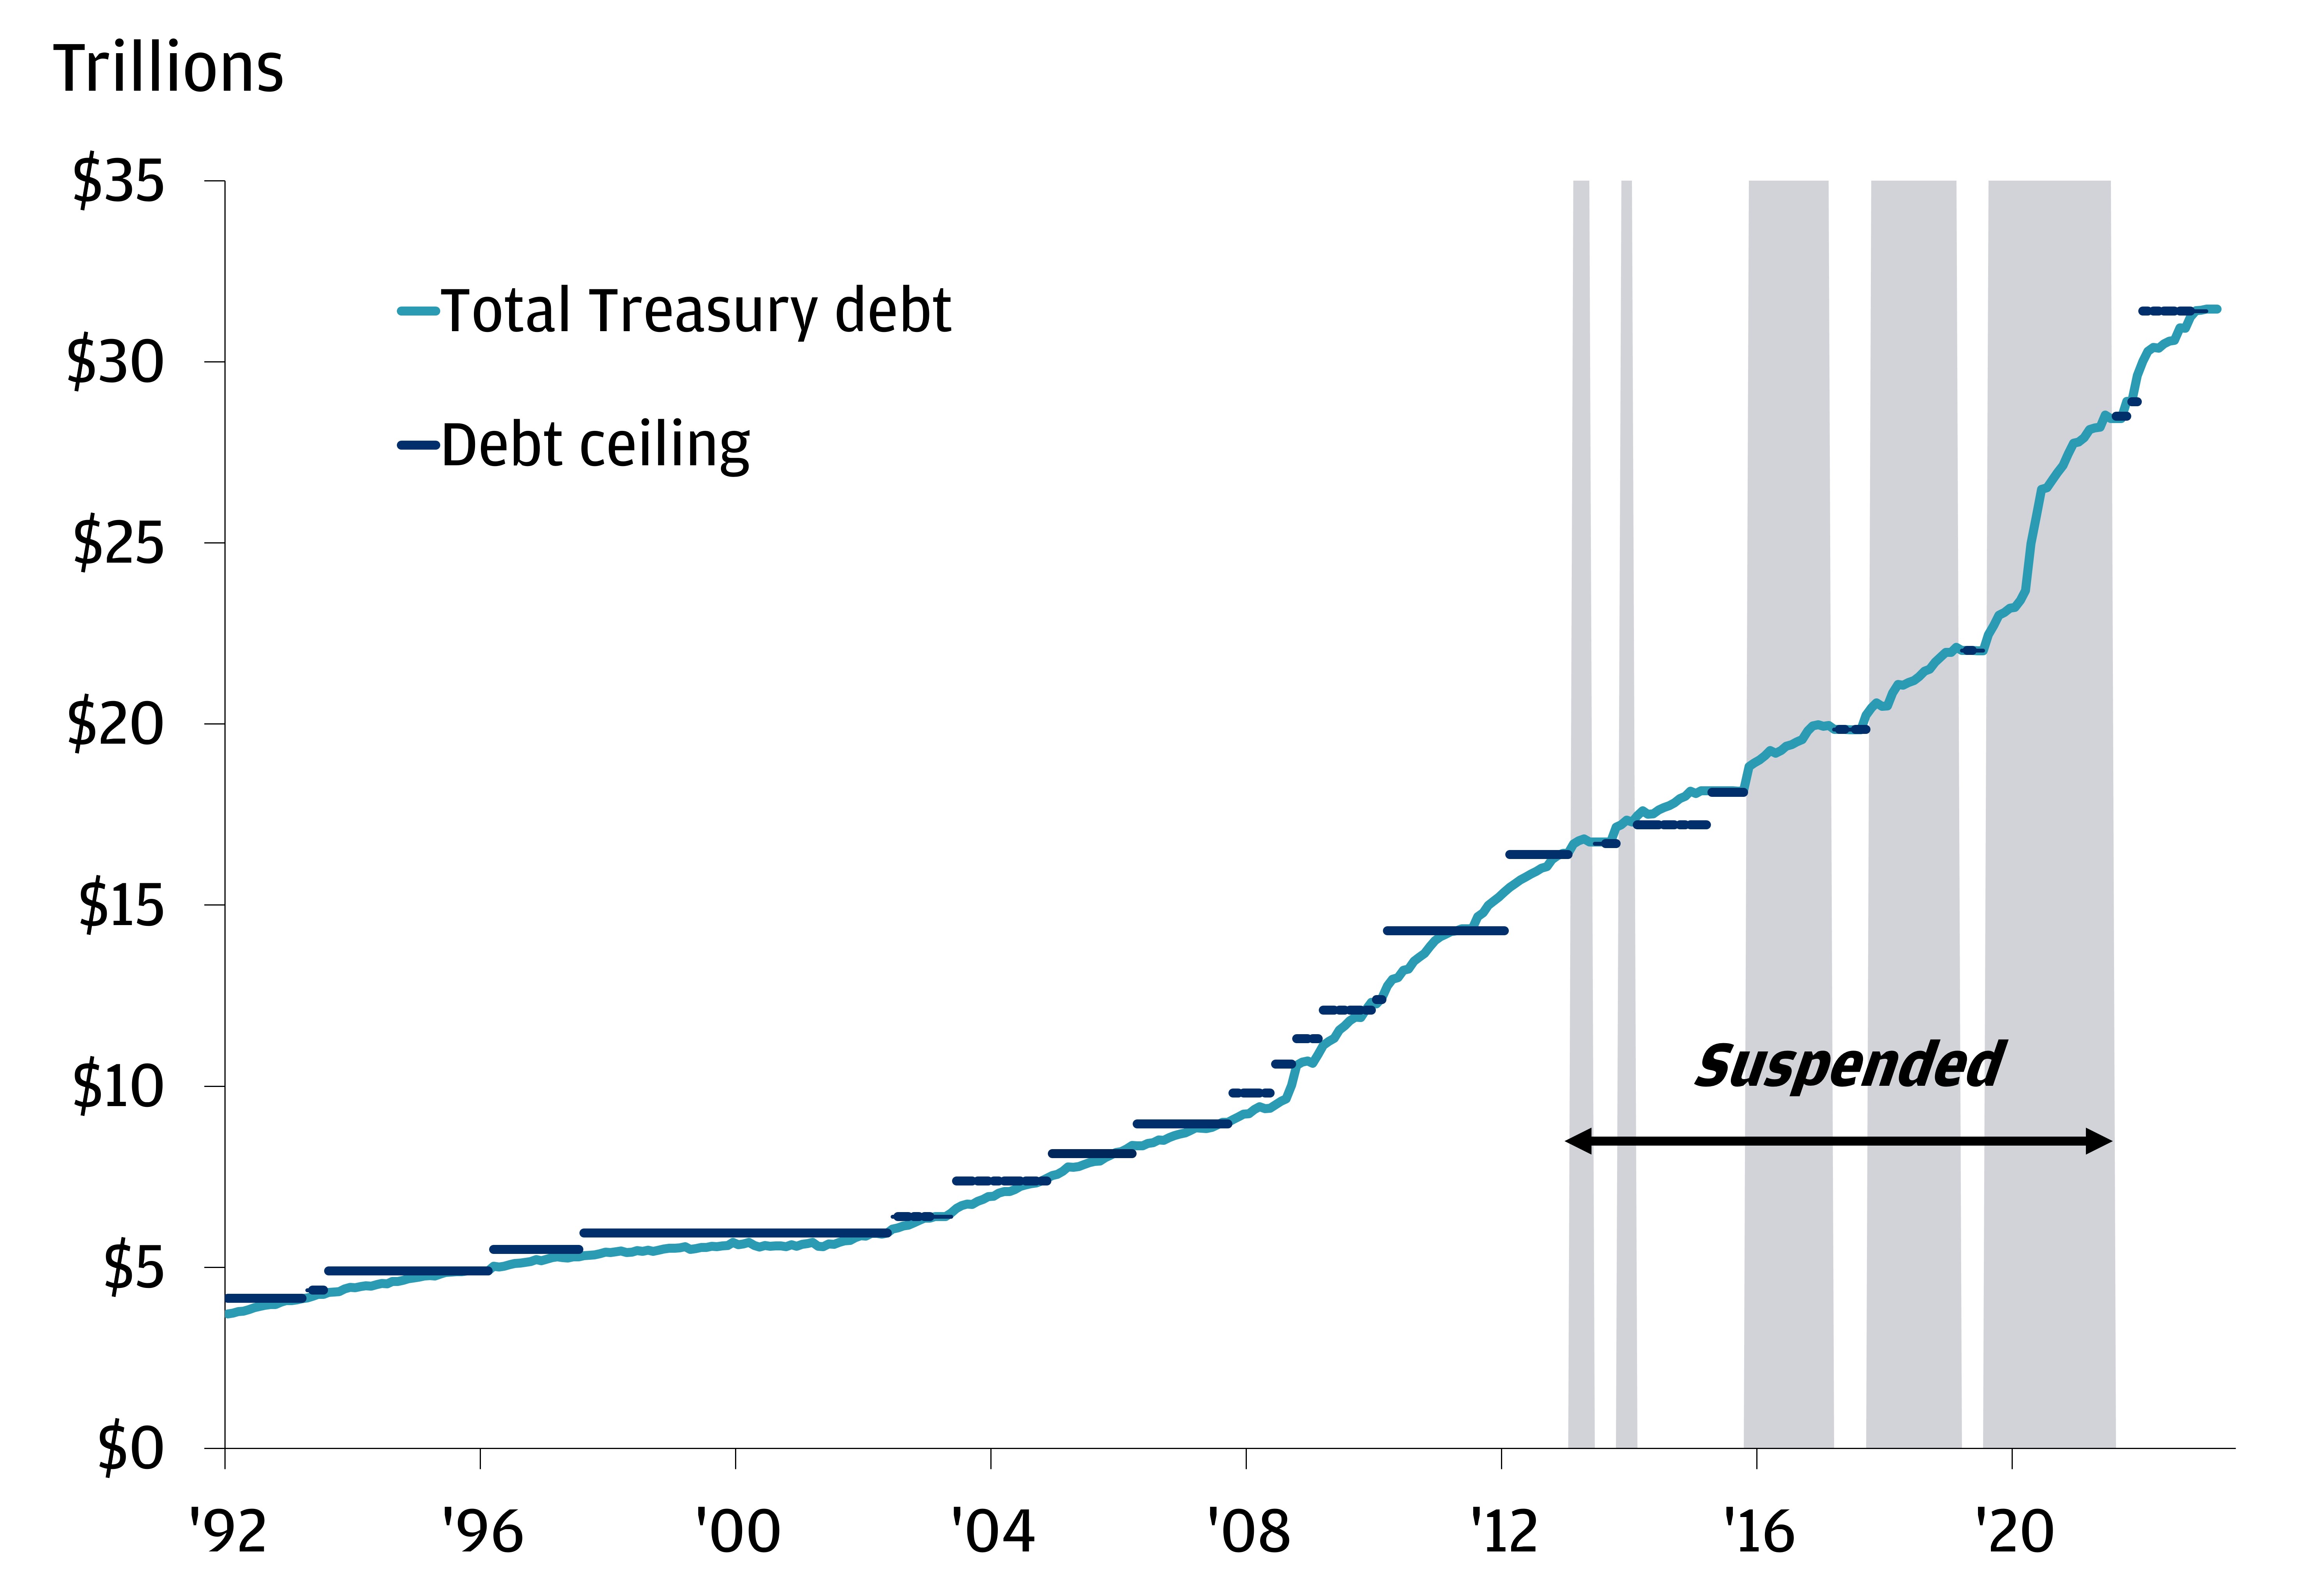 The chart describes total Treasury debt in a line format, and the history of the debt ceiling since January 1992 until now in a flat lines format.